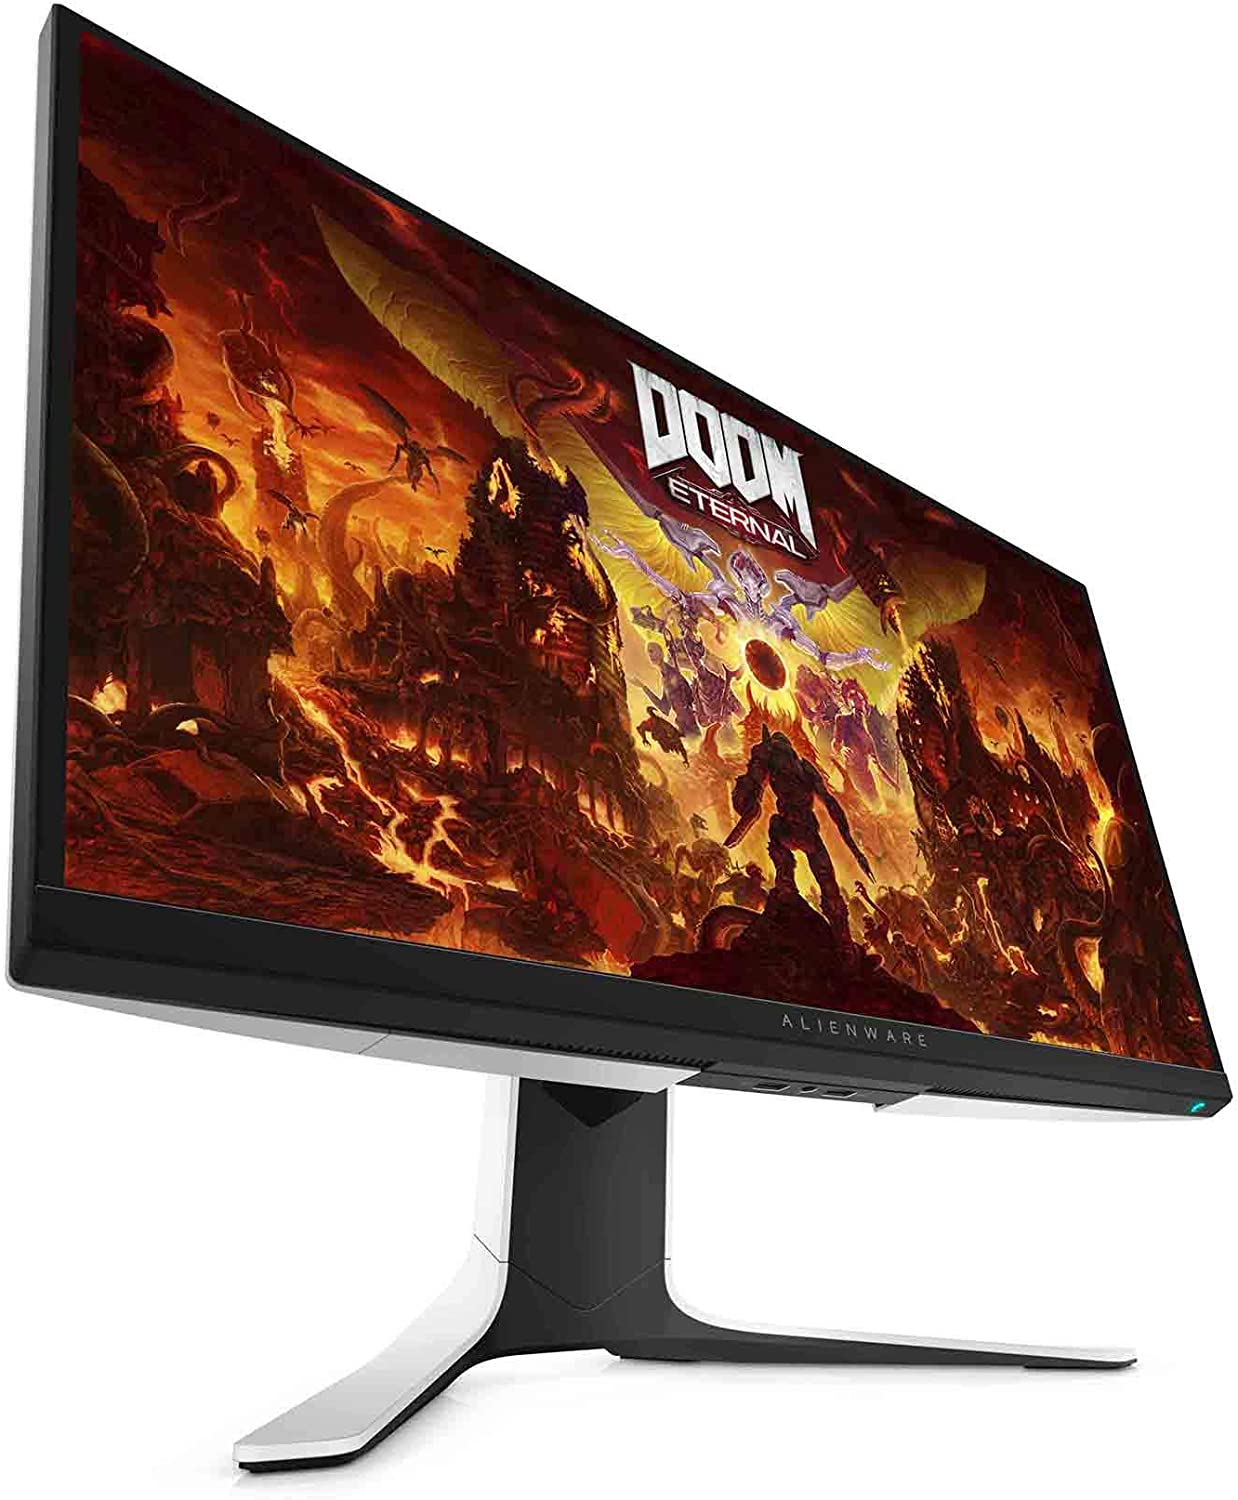 Dell - Alienware AW2720HF 27-Inch FHD IPS LED Edgelight Gaming